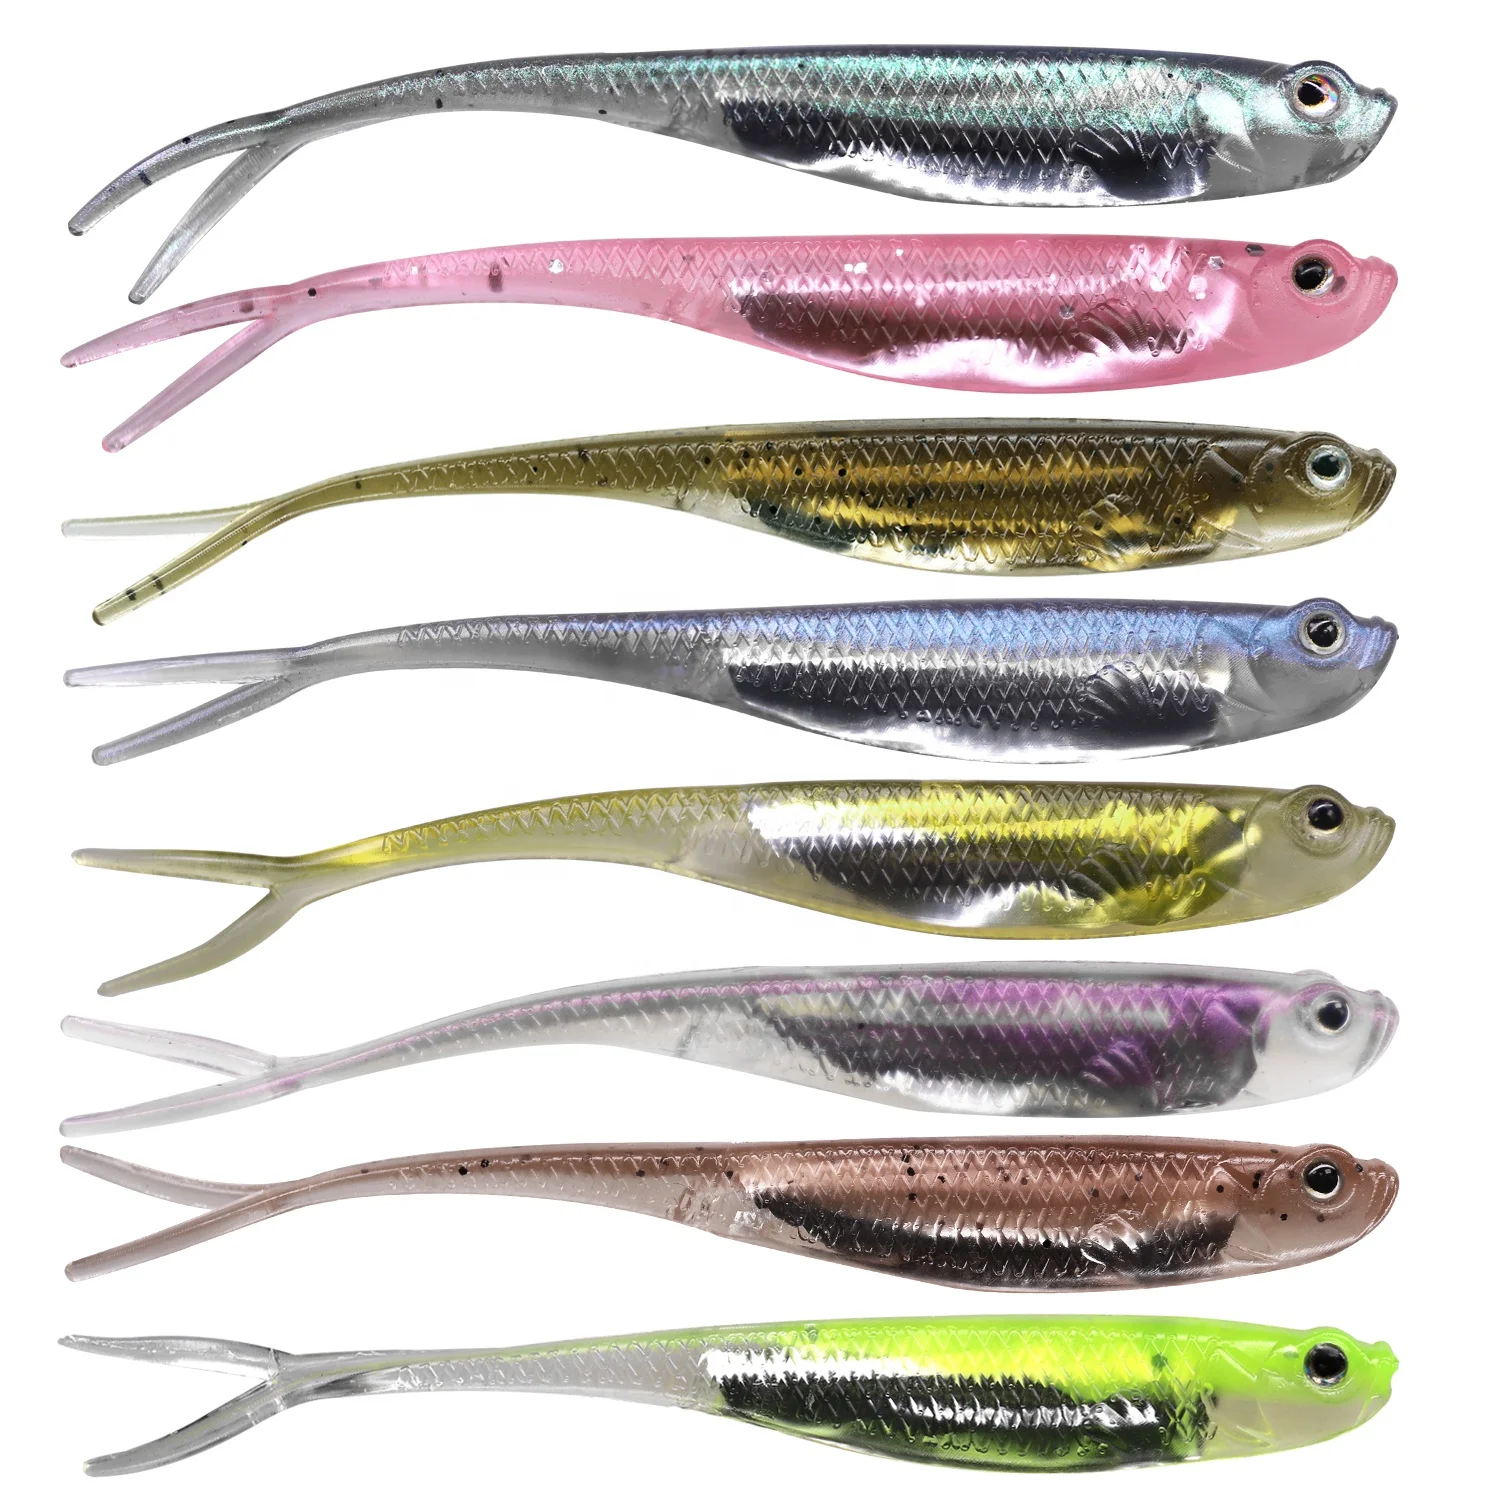 

stock is available, Fishing Soft Lures 7.5cm 1.8g Soft Jerk Shad Bait Fishing Worm Swimbaits Silicone Soft Lure For Carp Fishing, Mixed colour